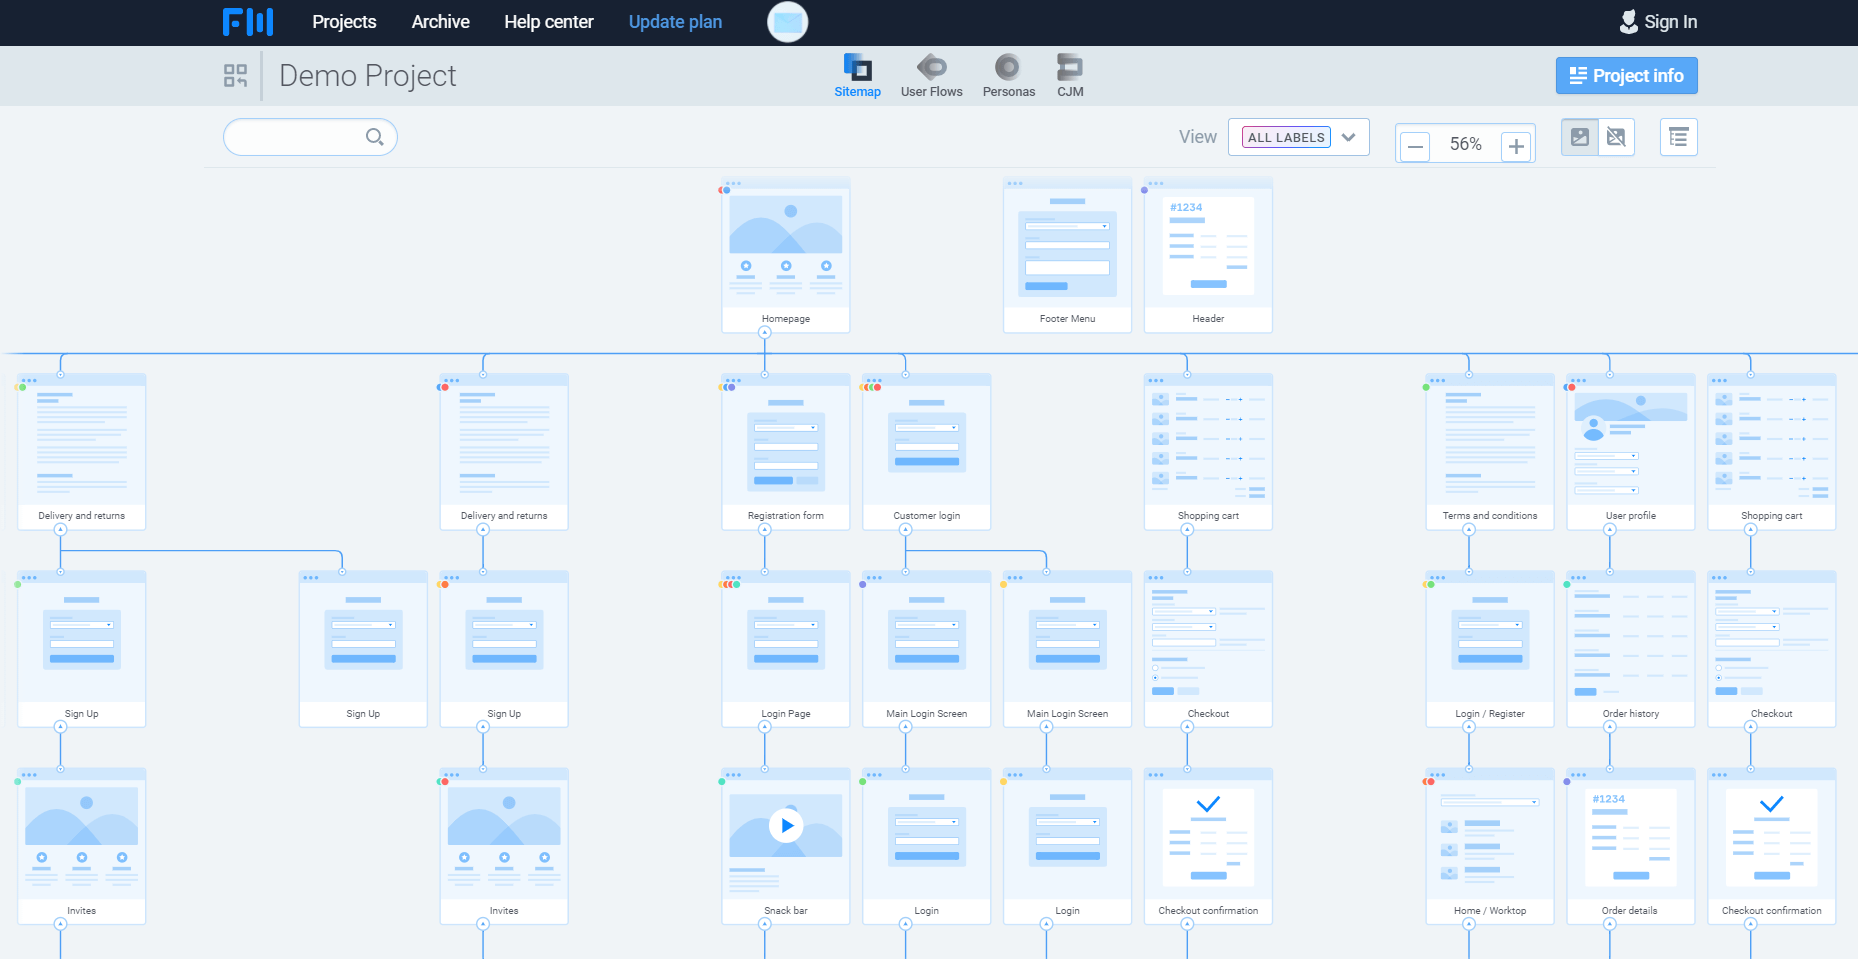 FlowMapp is a suite of powerful UX tools which includes a sitemap builder